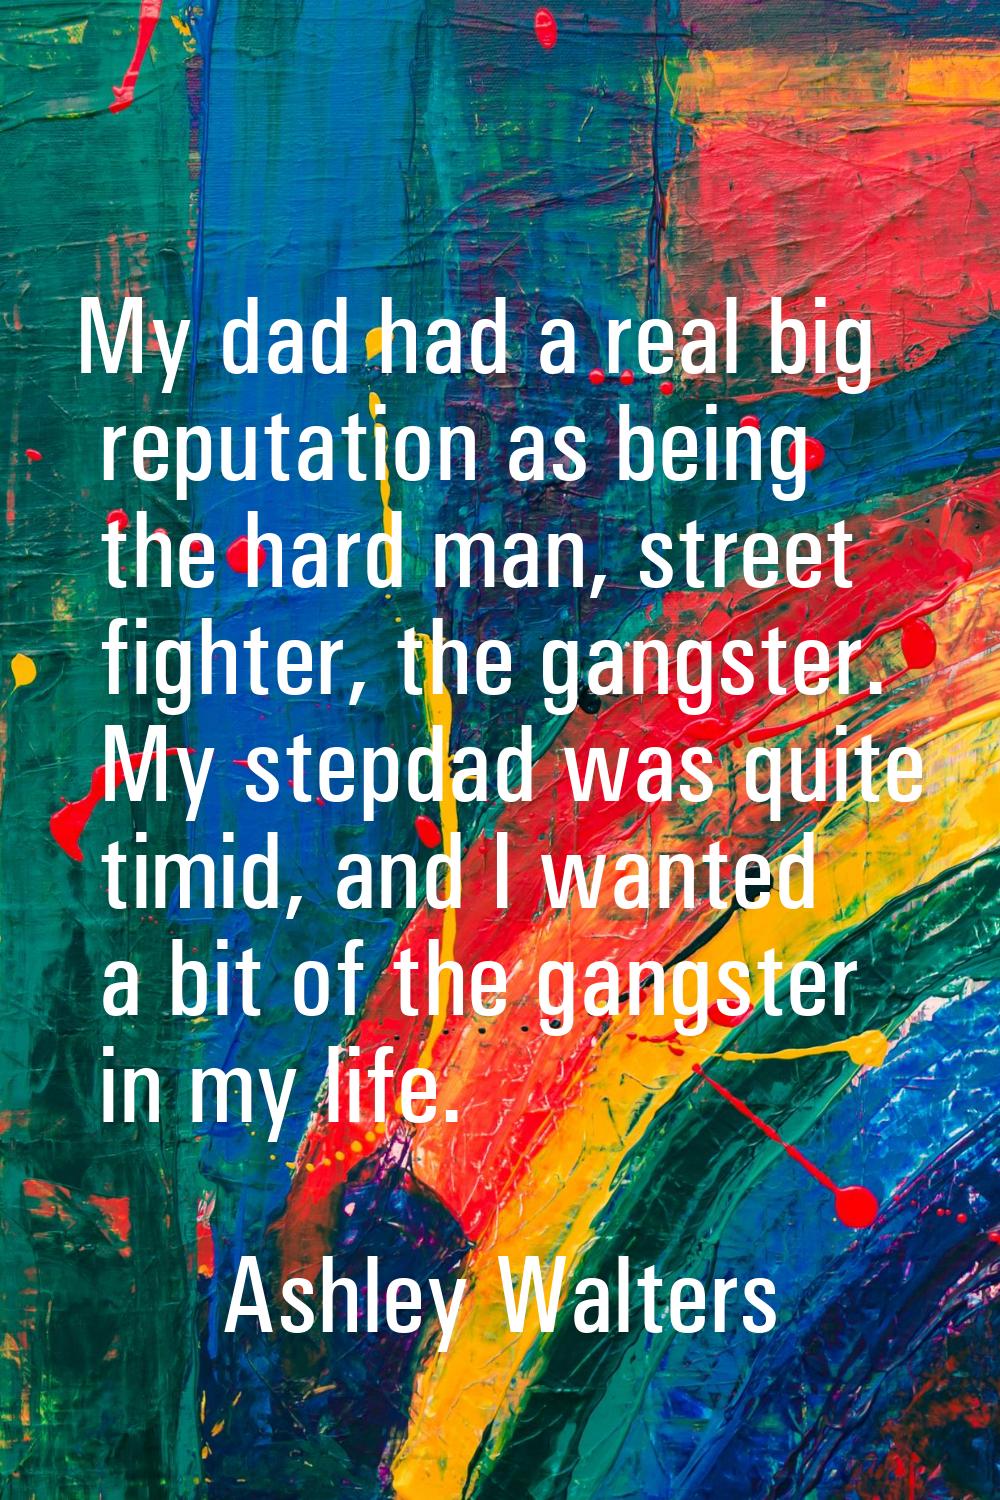 My dad had a real big reputation as being the hard man, street fighter, the gangster. My stepdad wa